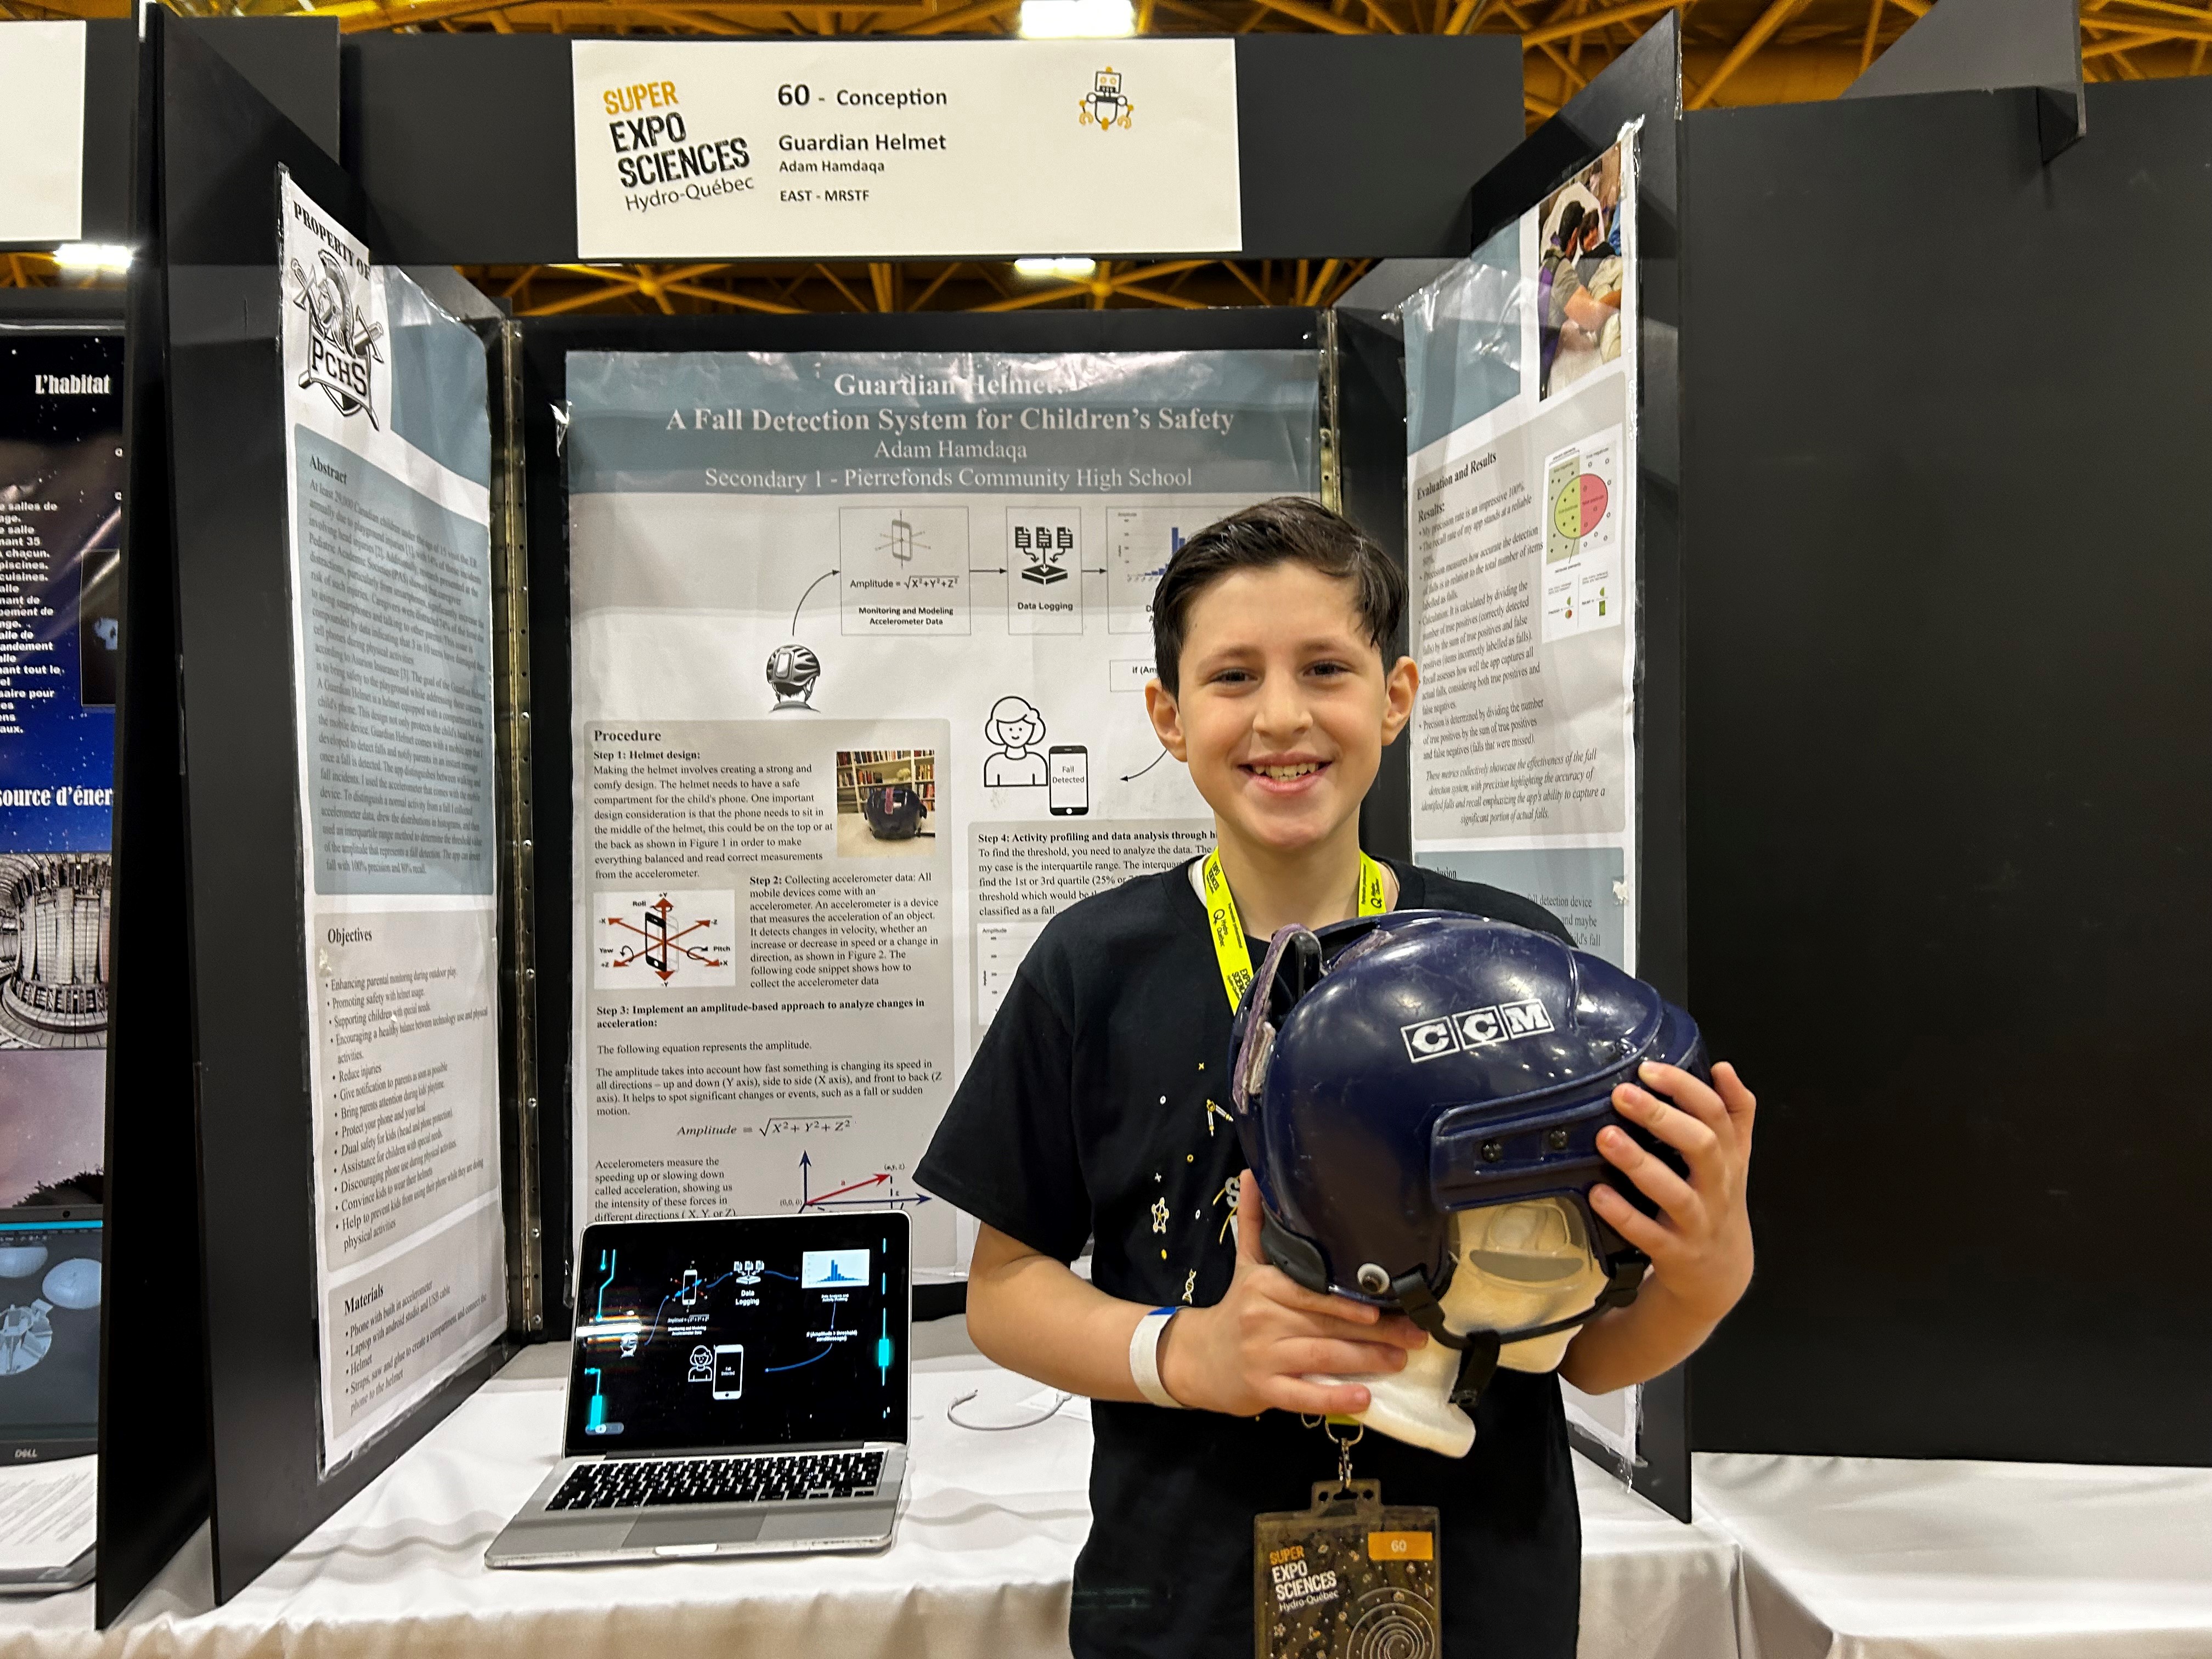 Quebec students vying to change the world display projects at science fair